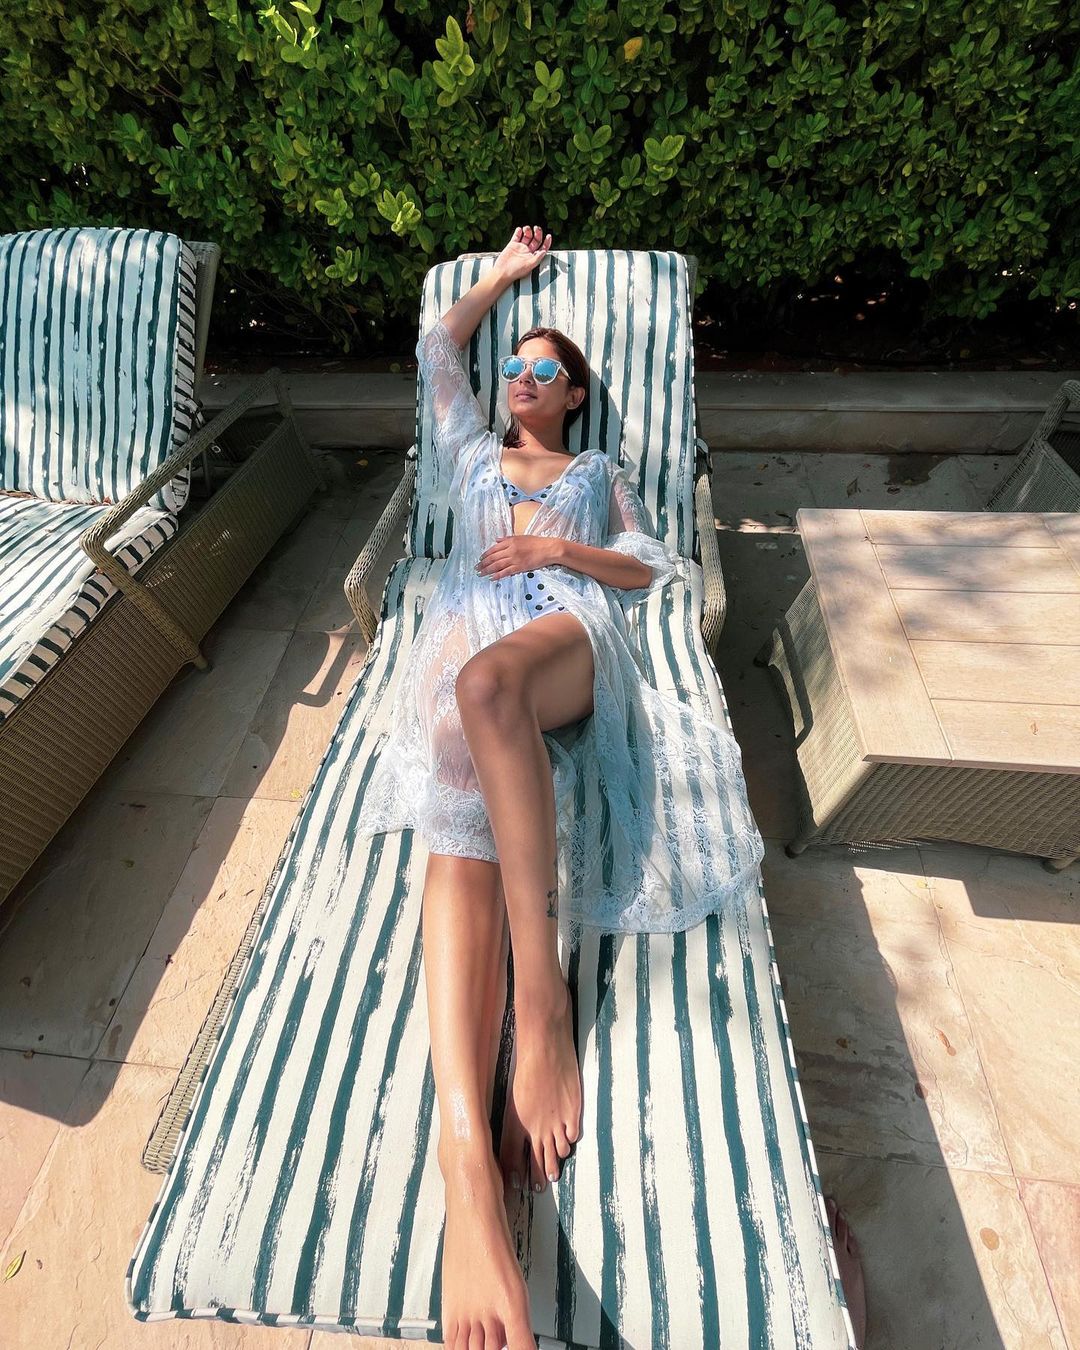 Jennifer Winget soaks up some Vitamin D in the stylish two-piece and shrug